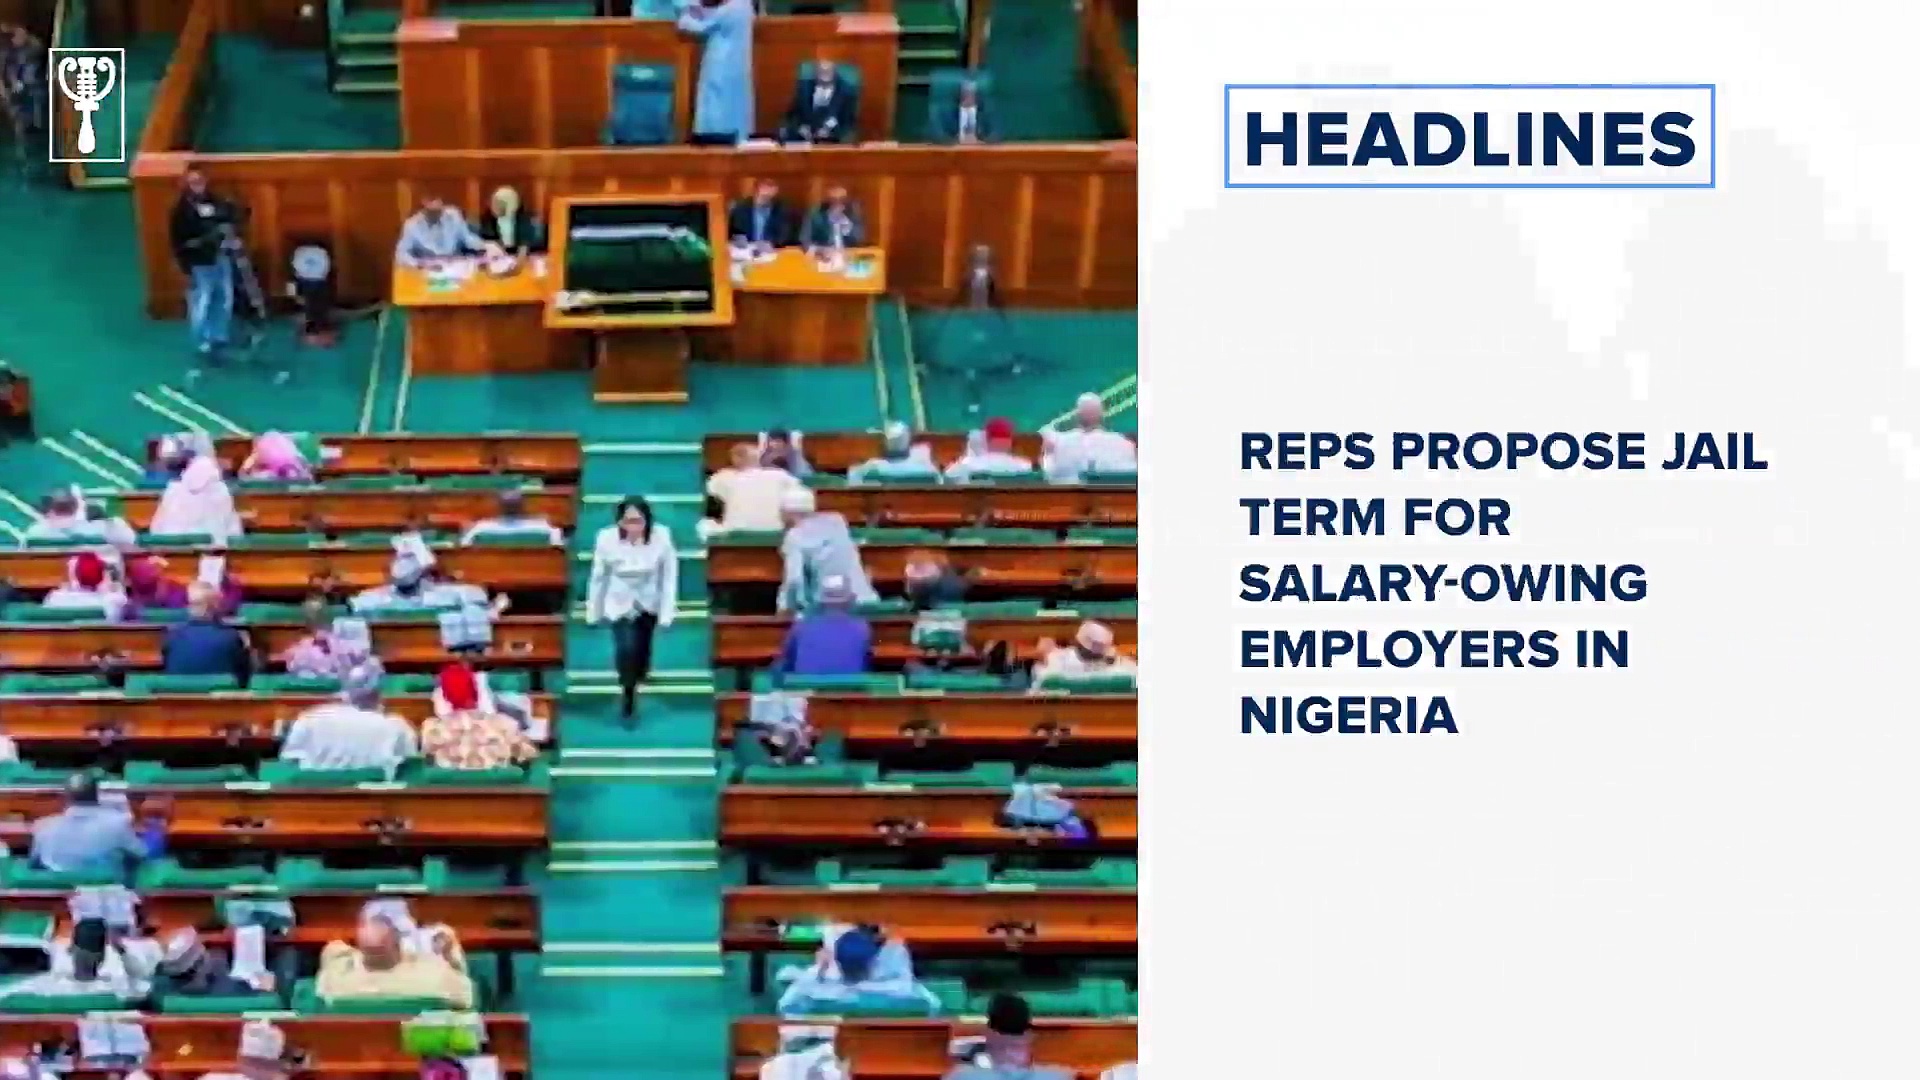 Reps propose jail term for salary-owing employers in Nigeria and more